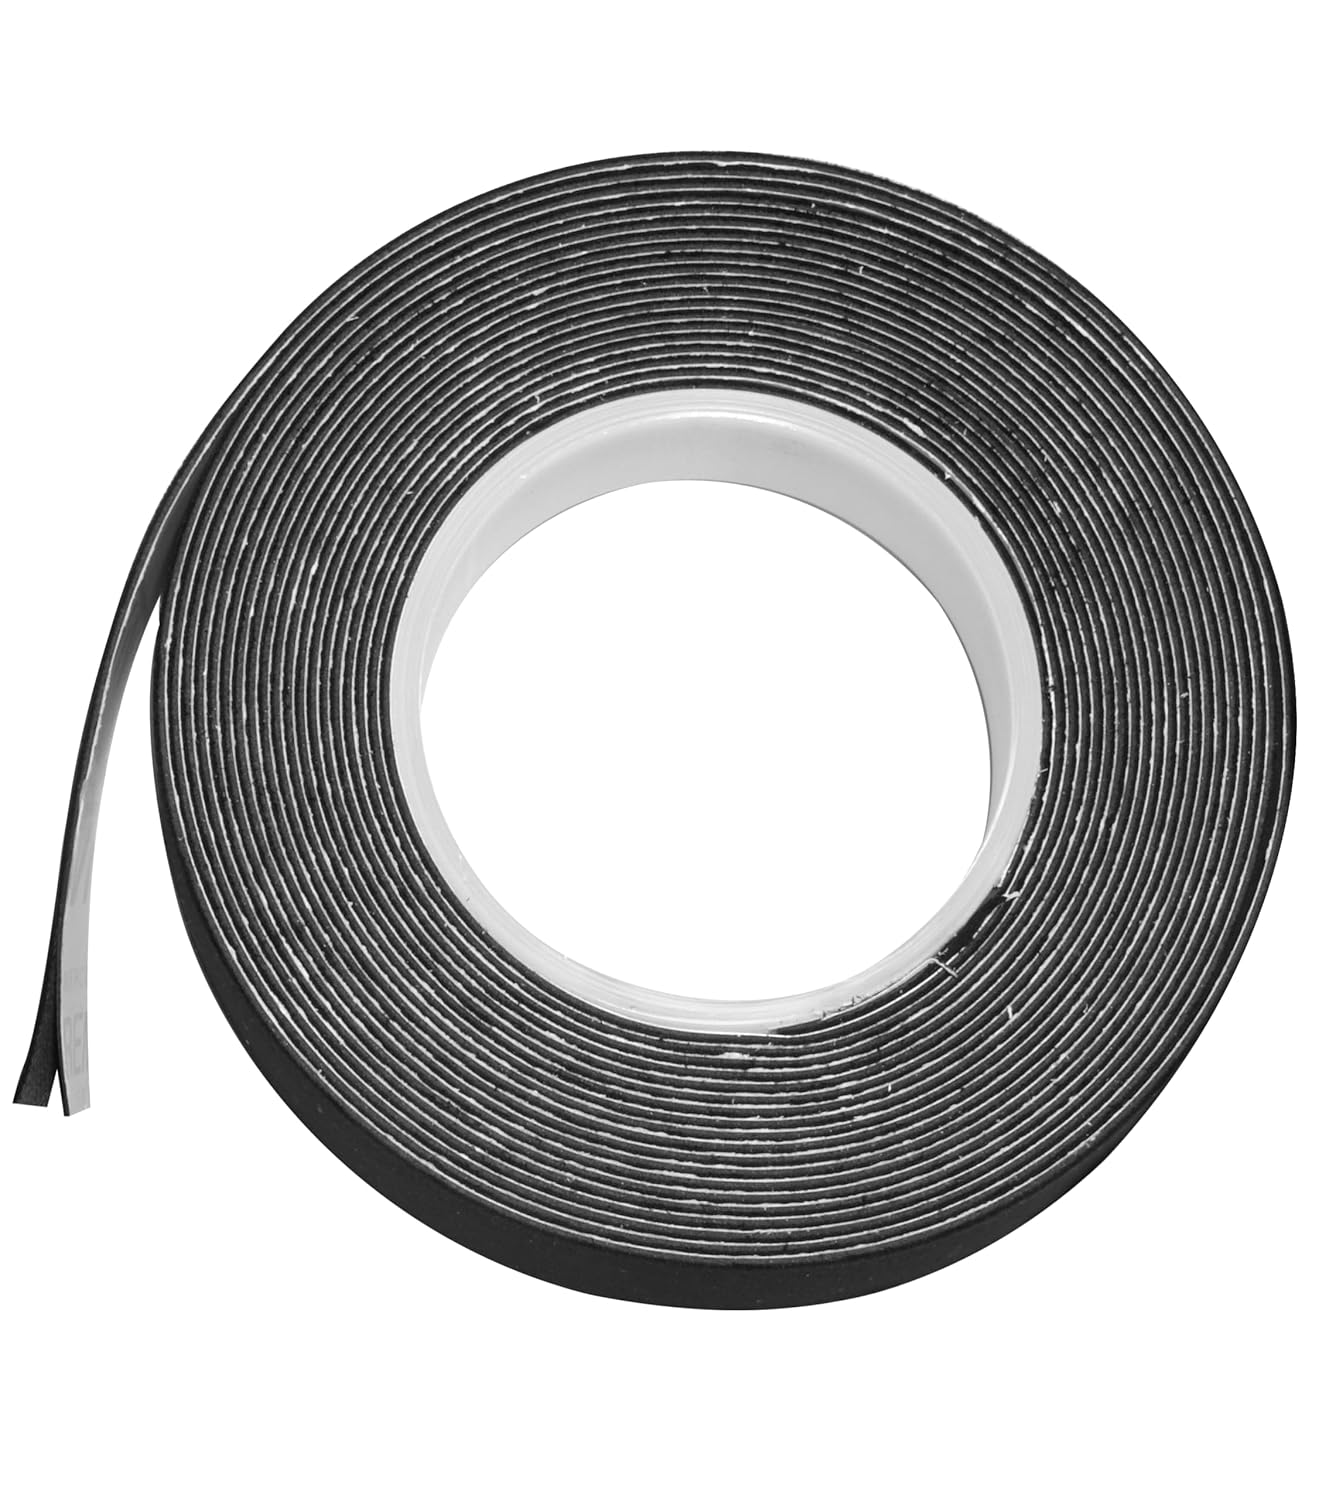 Black Felt for Squeegee Edge 1" x 25ft Bulk Roll - (MCF) [Pre-packed, faster shipping]